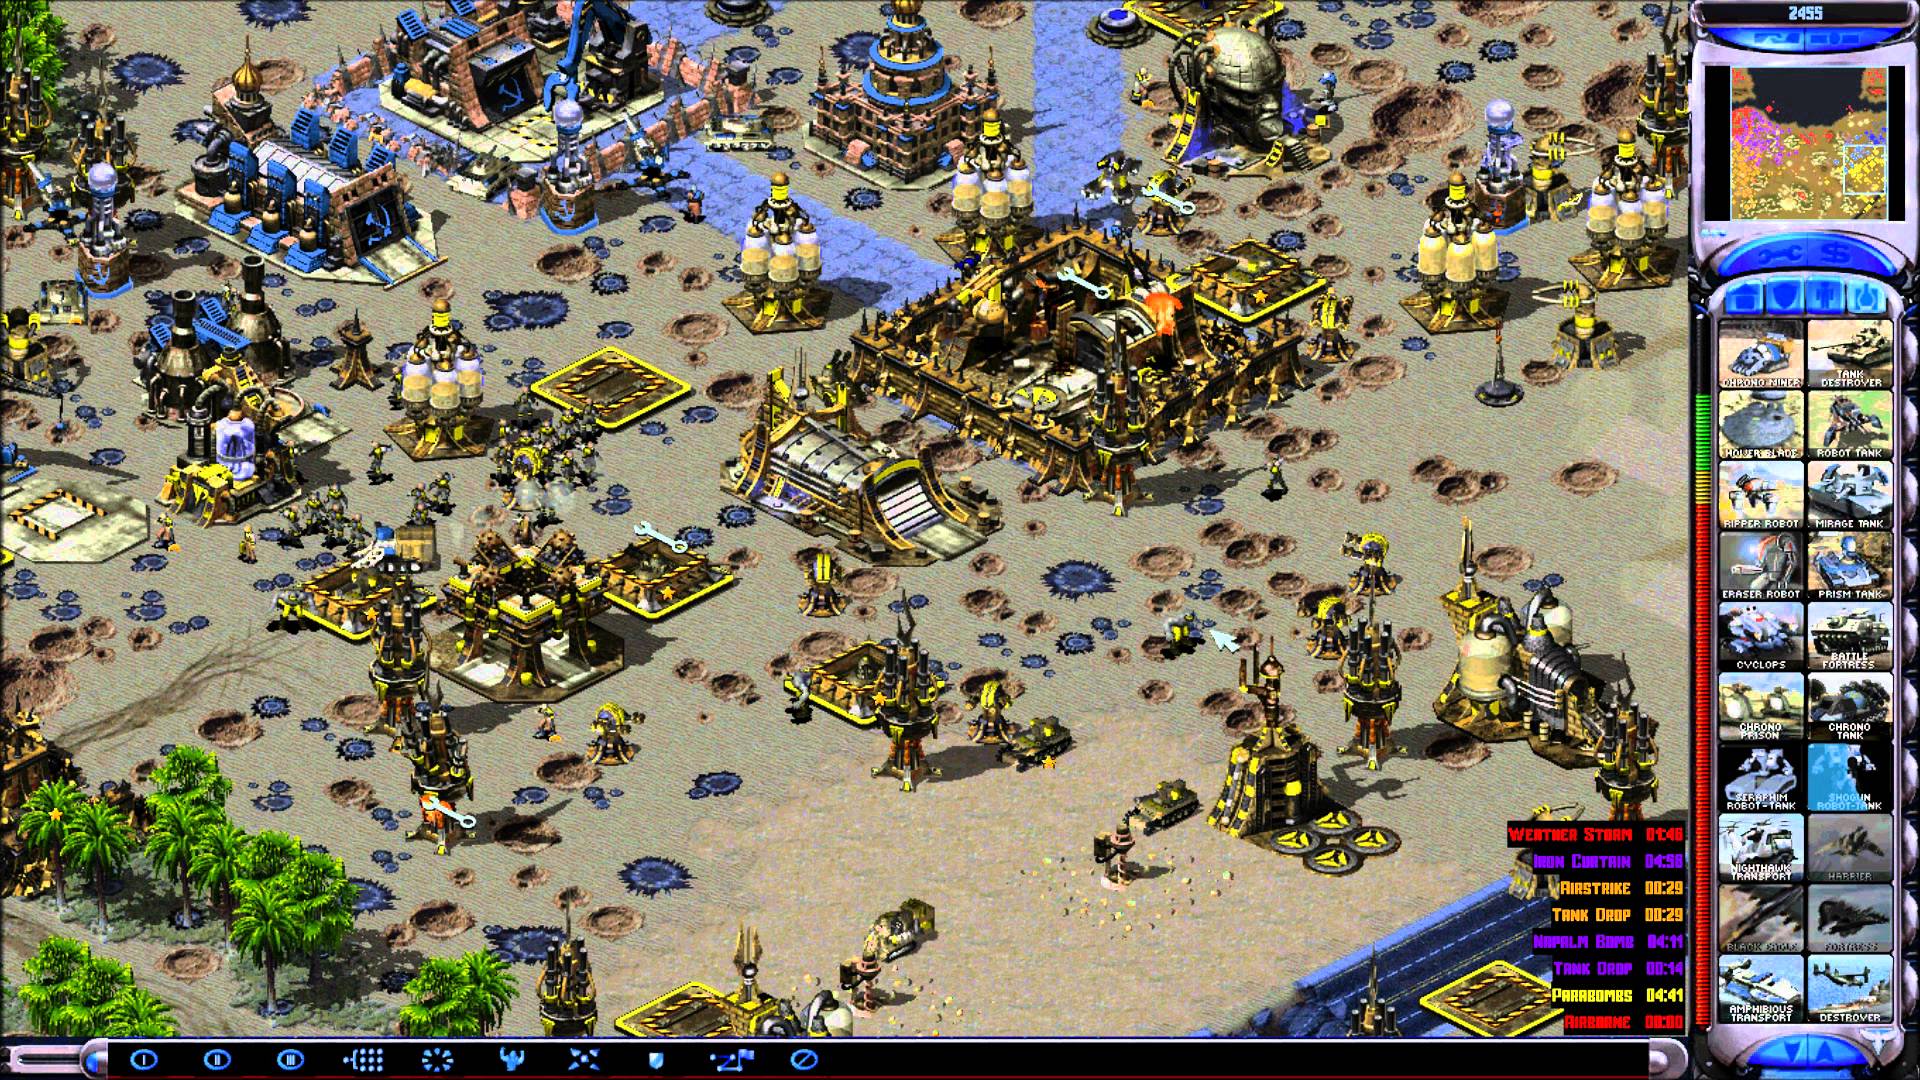 command and conquer red alert 2 cheat engine download